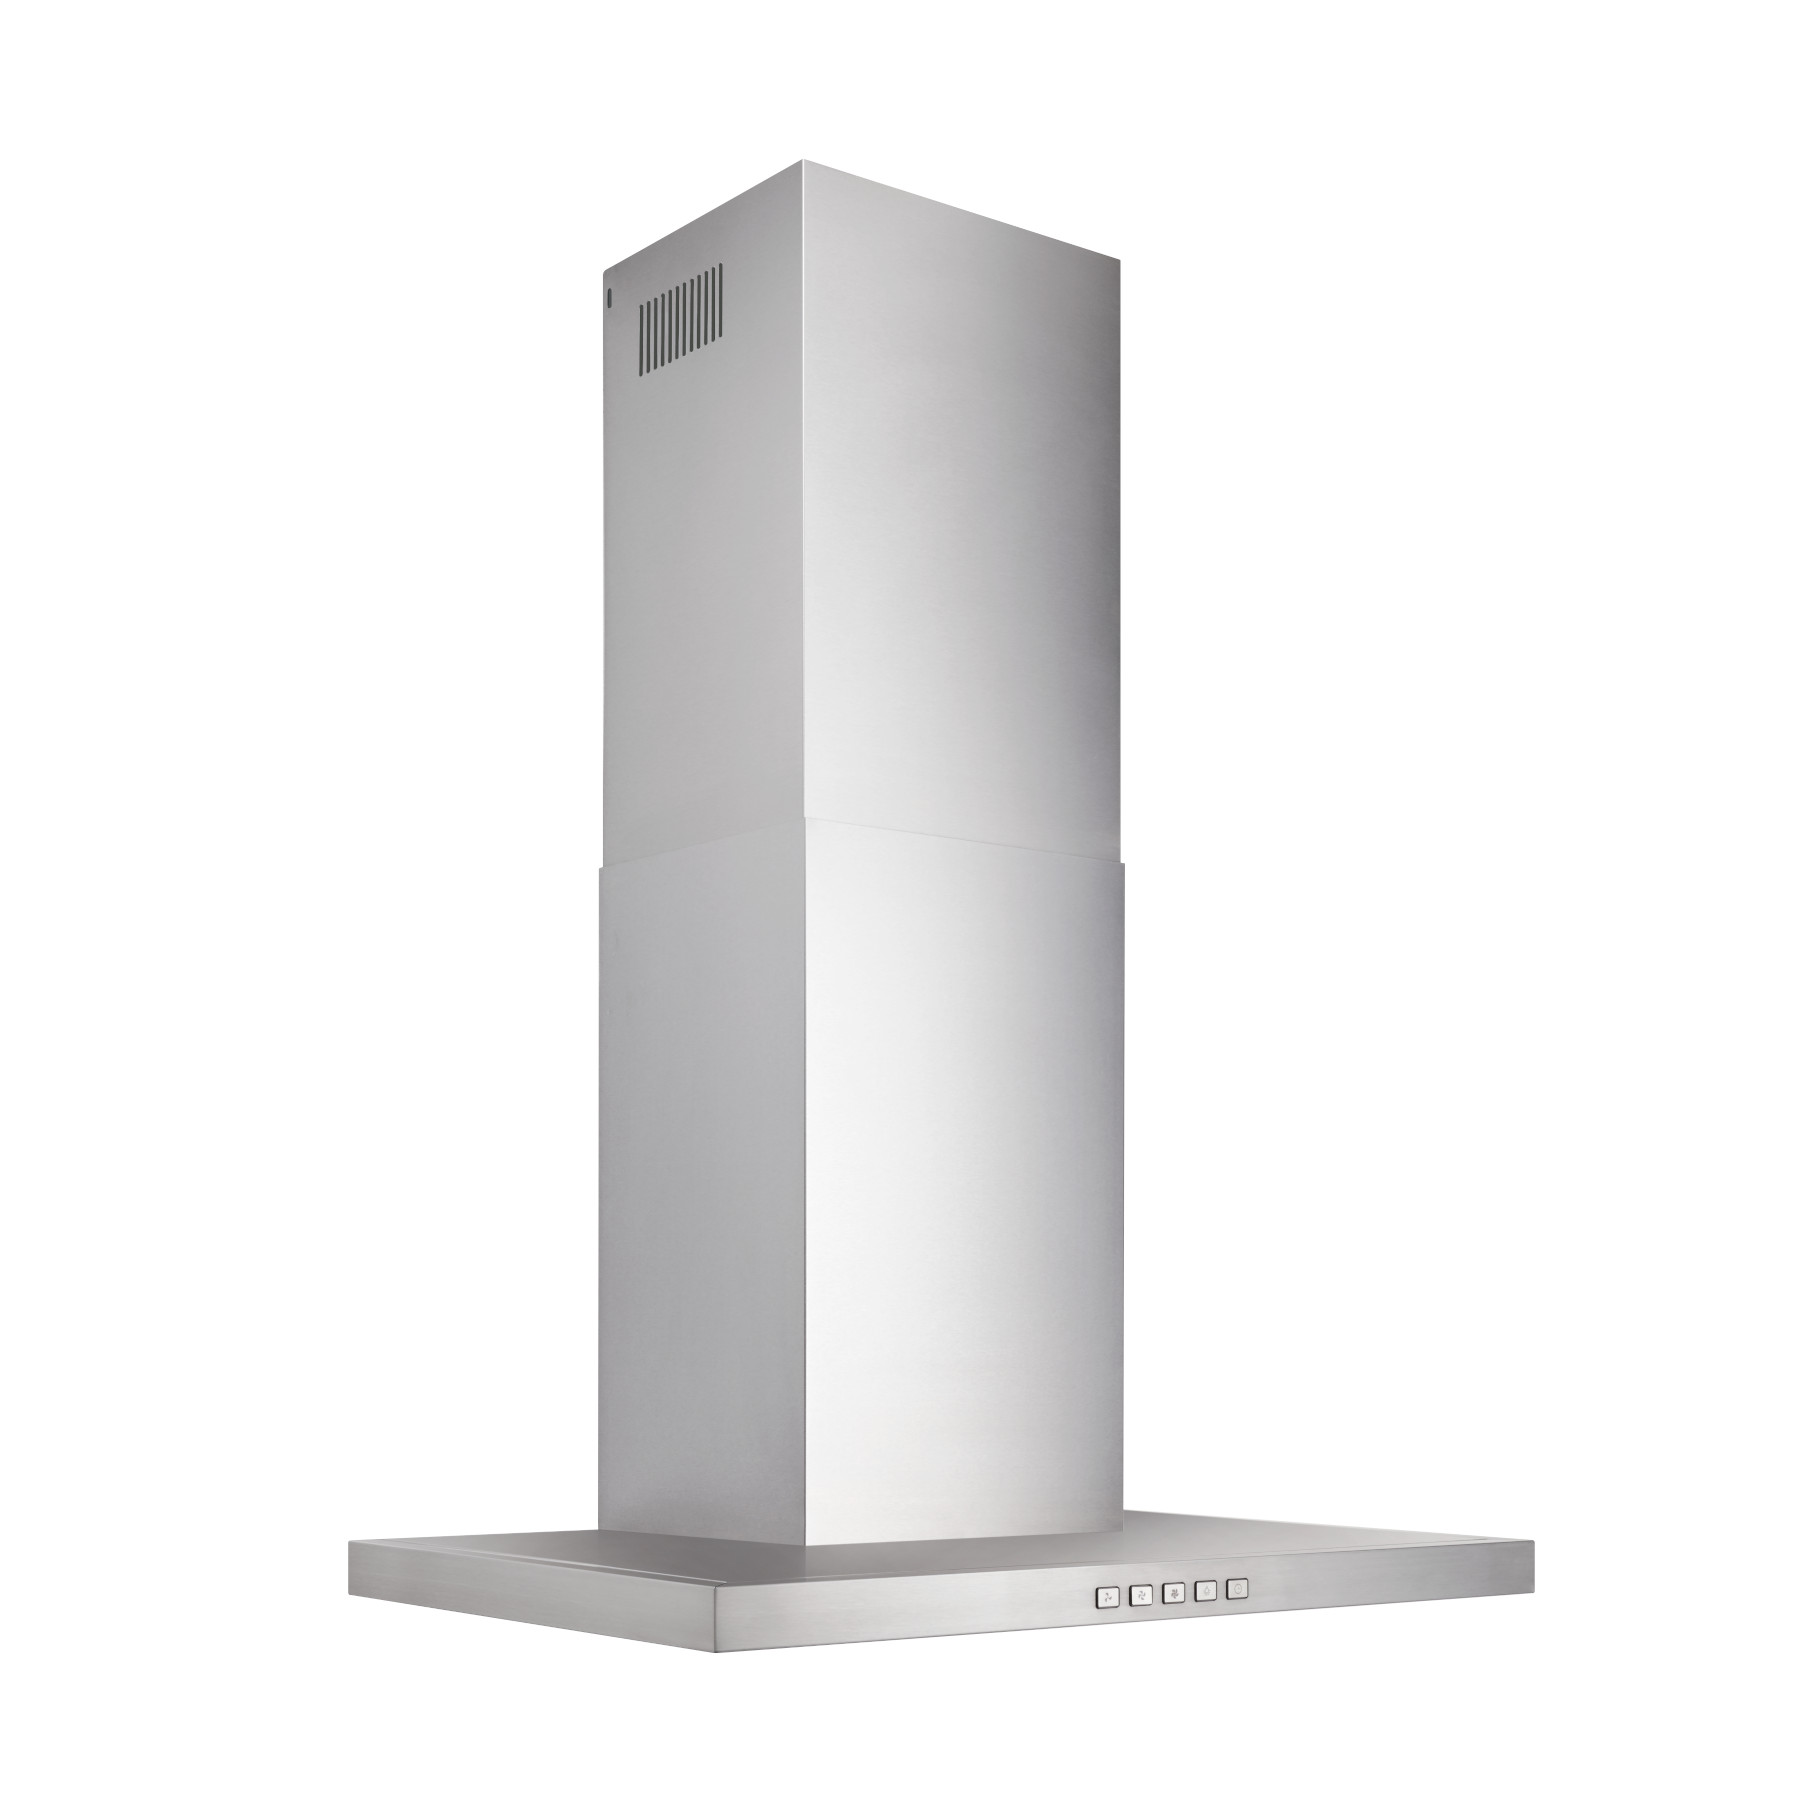 **DISCONTINUED** Broan® 30-Inch Convertible Wall-Mount T-Style Chimney Range Hood, 450 MAX CFM, Stainless Steel